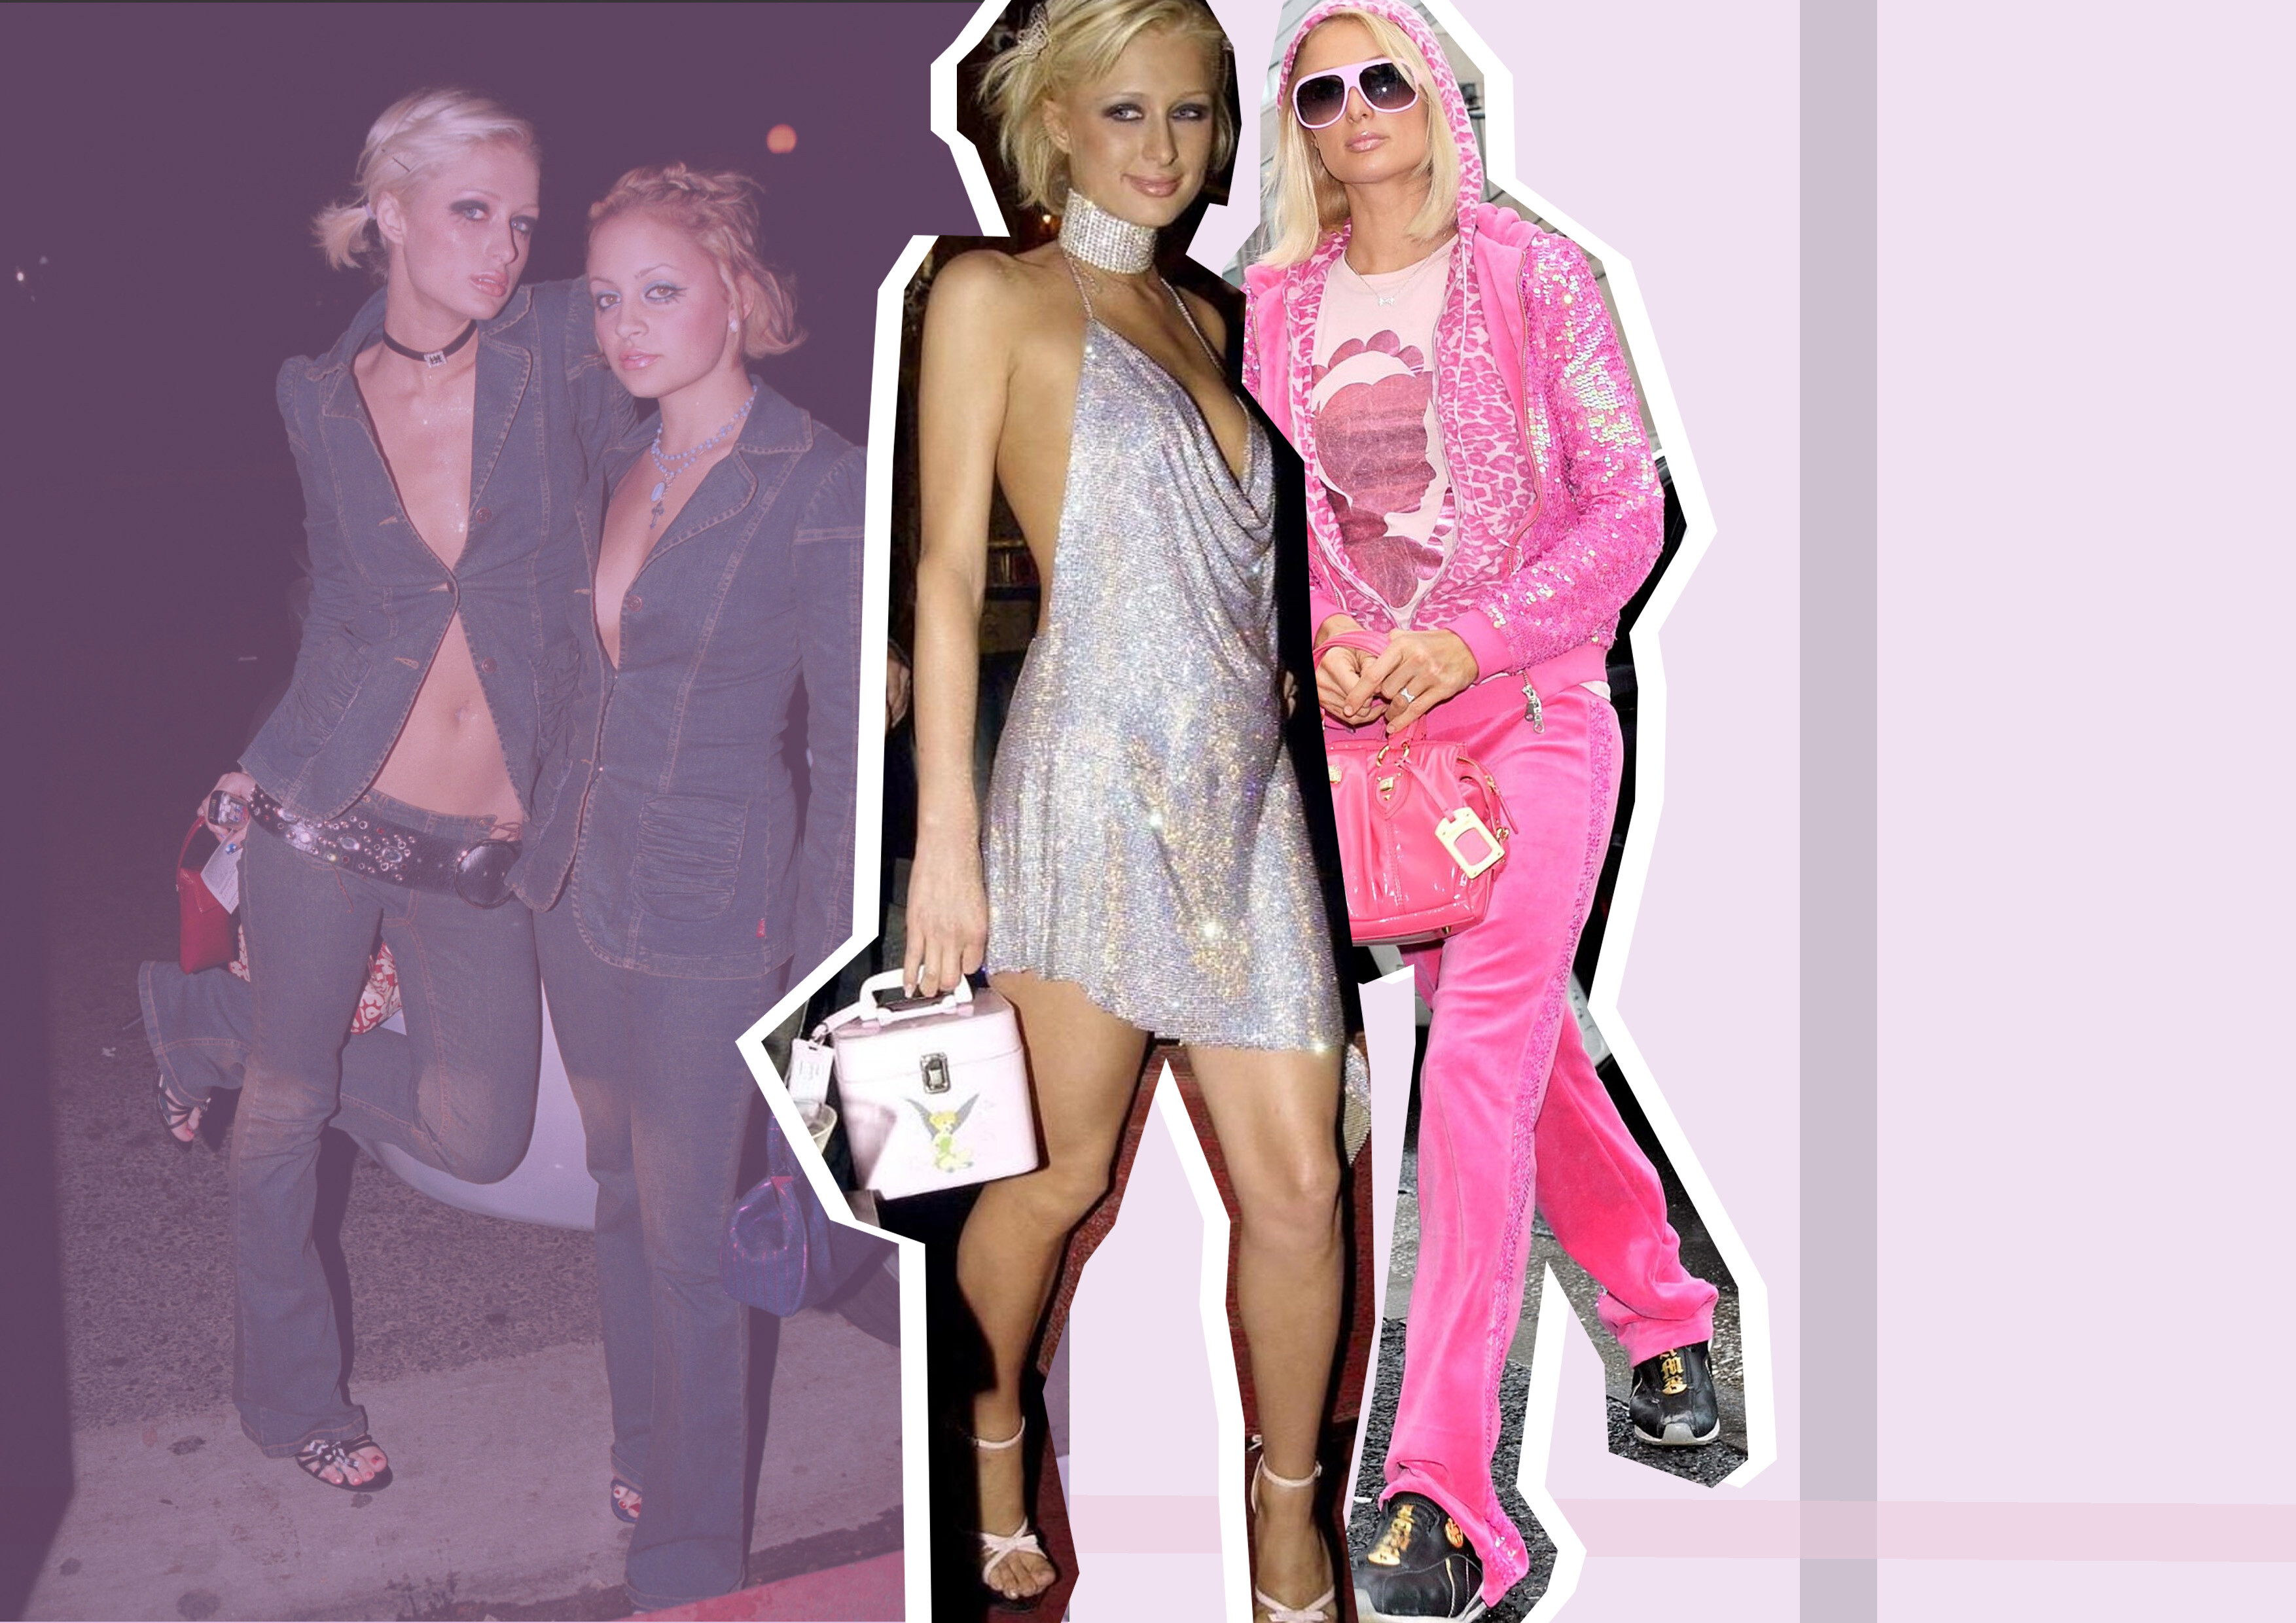 Paris Hilton's Most Iconic 2000s Looks, From Juicy Couture to Rhinestones